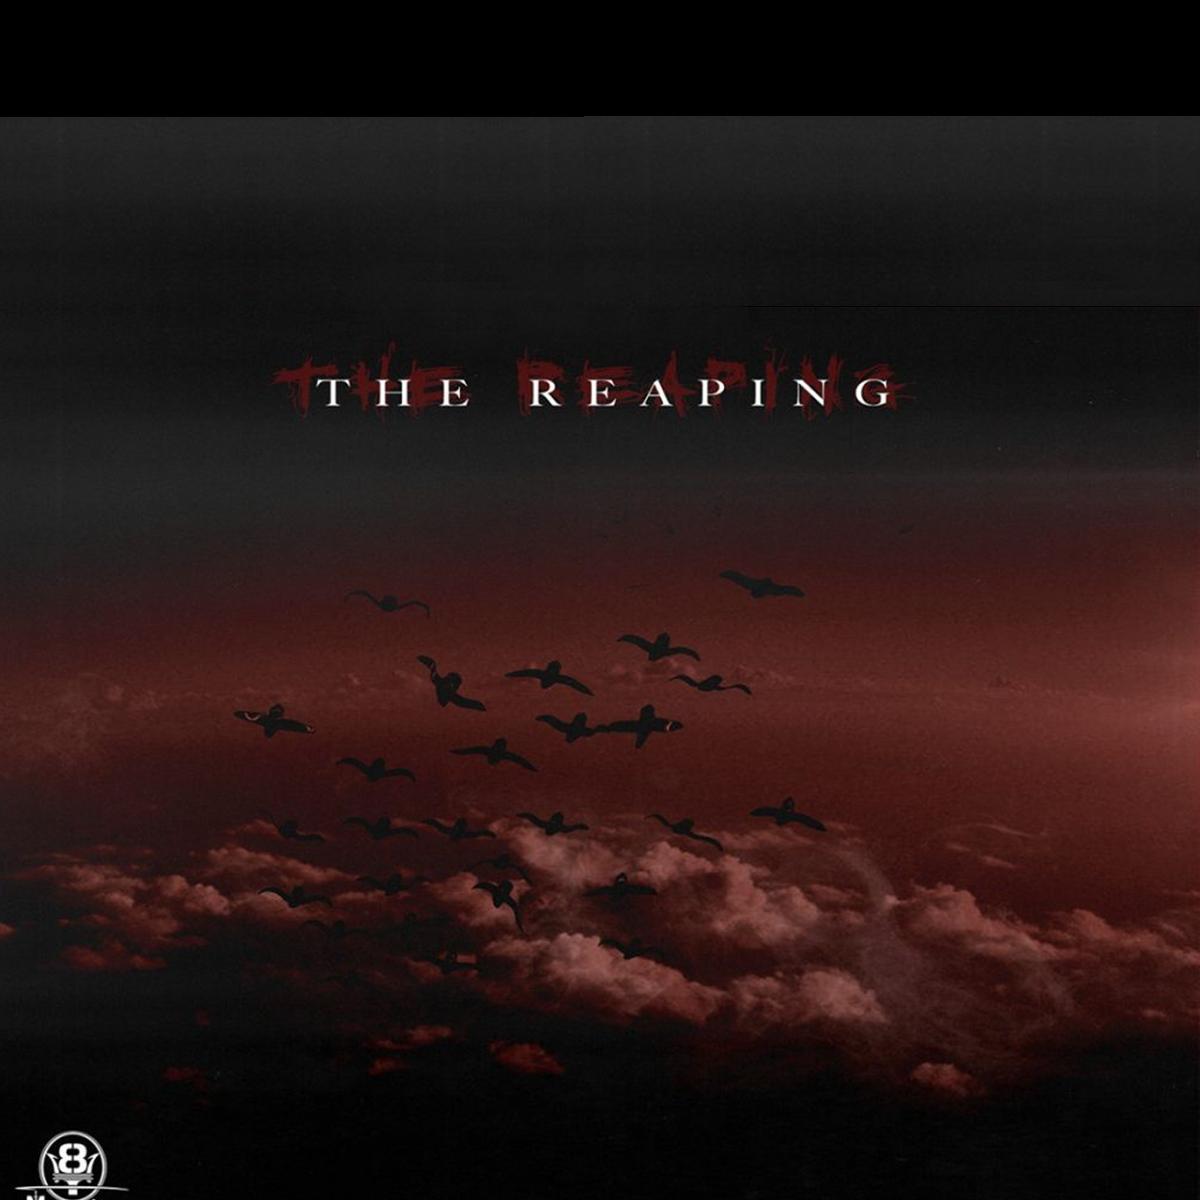 Cover of The Reaping Omnisphere Bank